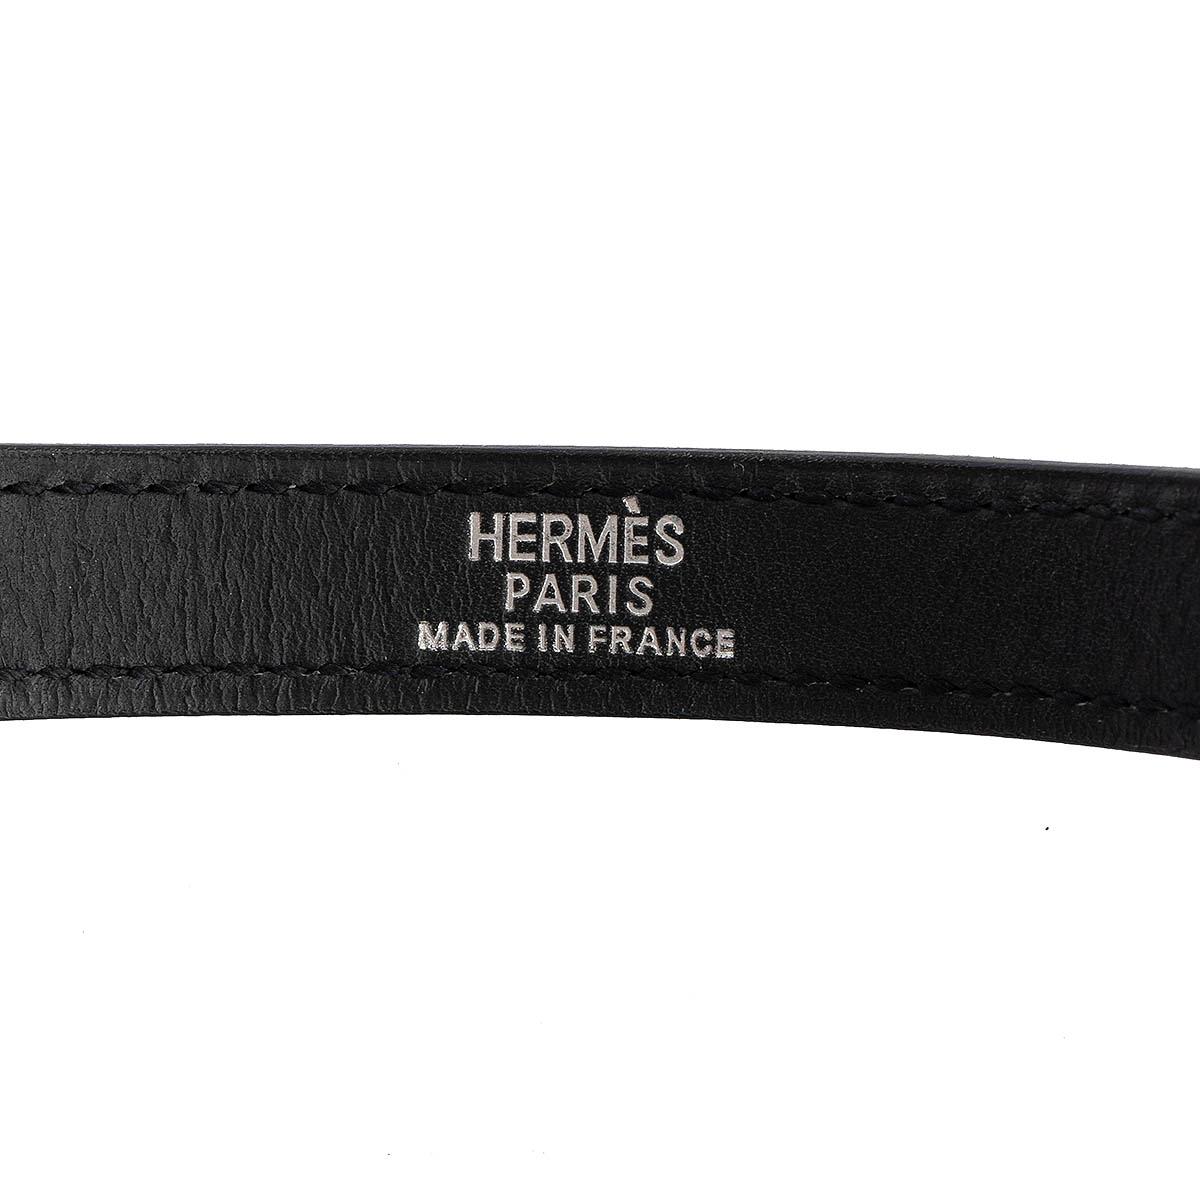 100% authentic Hermès Kelly Double Tour bracelet in Noir Swift leather with Palladium hardware. Has been worn and is in excellent condition. 

Measurements
Width	1cm (0.4in)
Length	36.6cm (14.3in)
Circumference	15cm (5.9in)
Hardware	Palladium

All